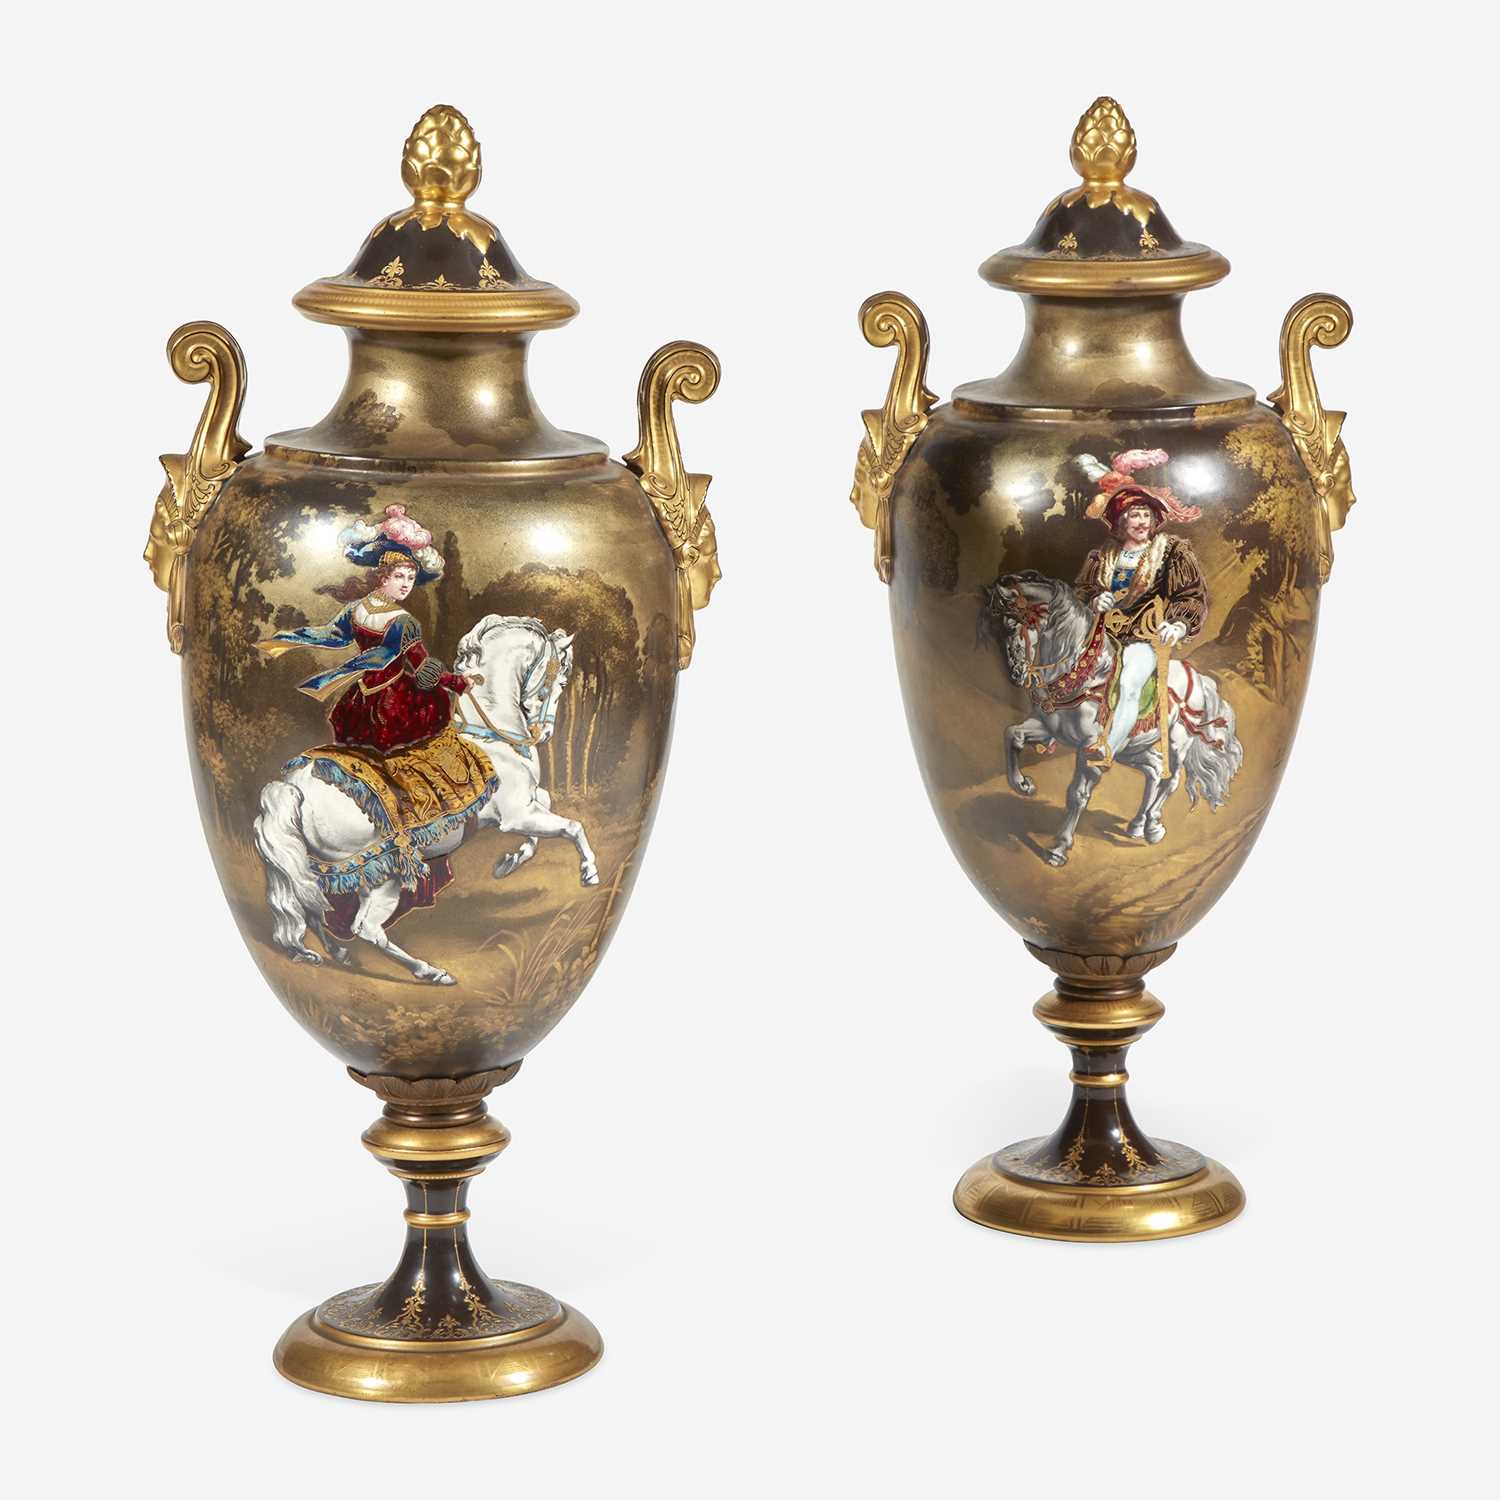 Lot 54 - A Pair of Sèvres Style Parcel-Gilt and Enameled Covered Vases